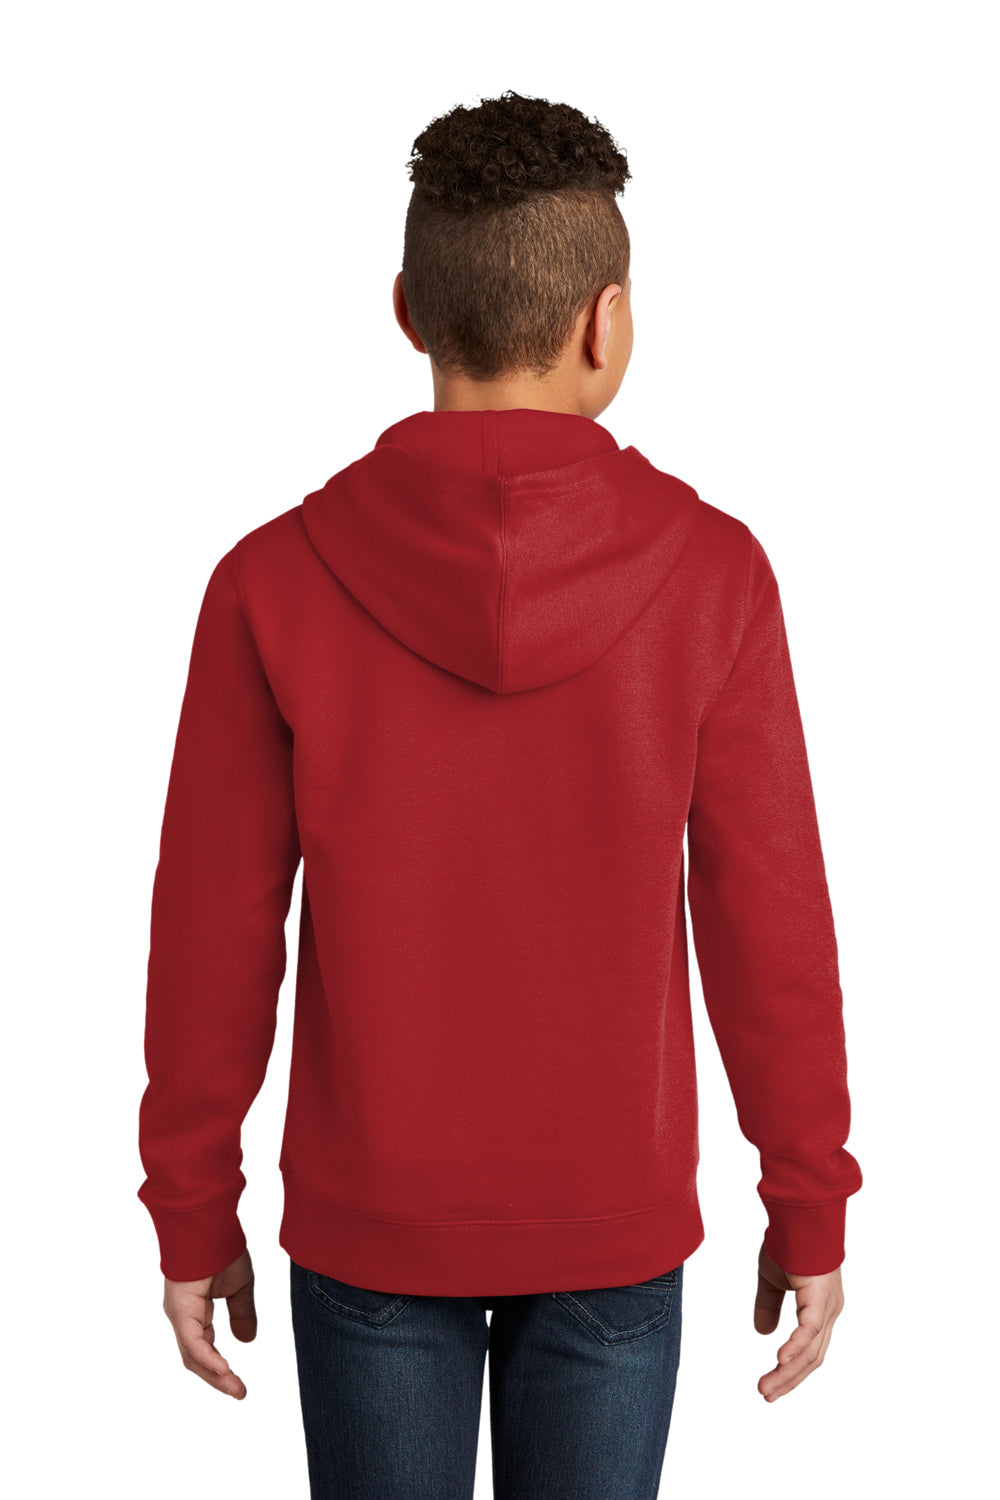 District Youth Very Important Fleece Hooded Sweatshirt Hoodie Classic Red Side